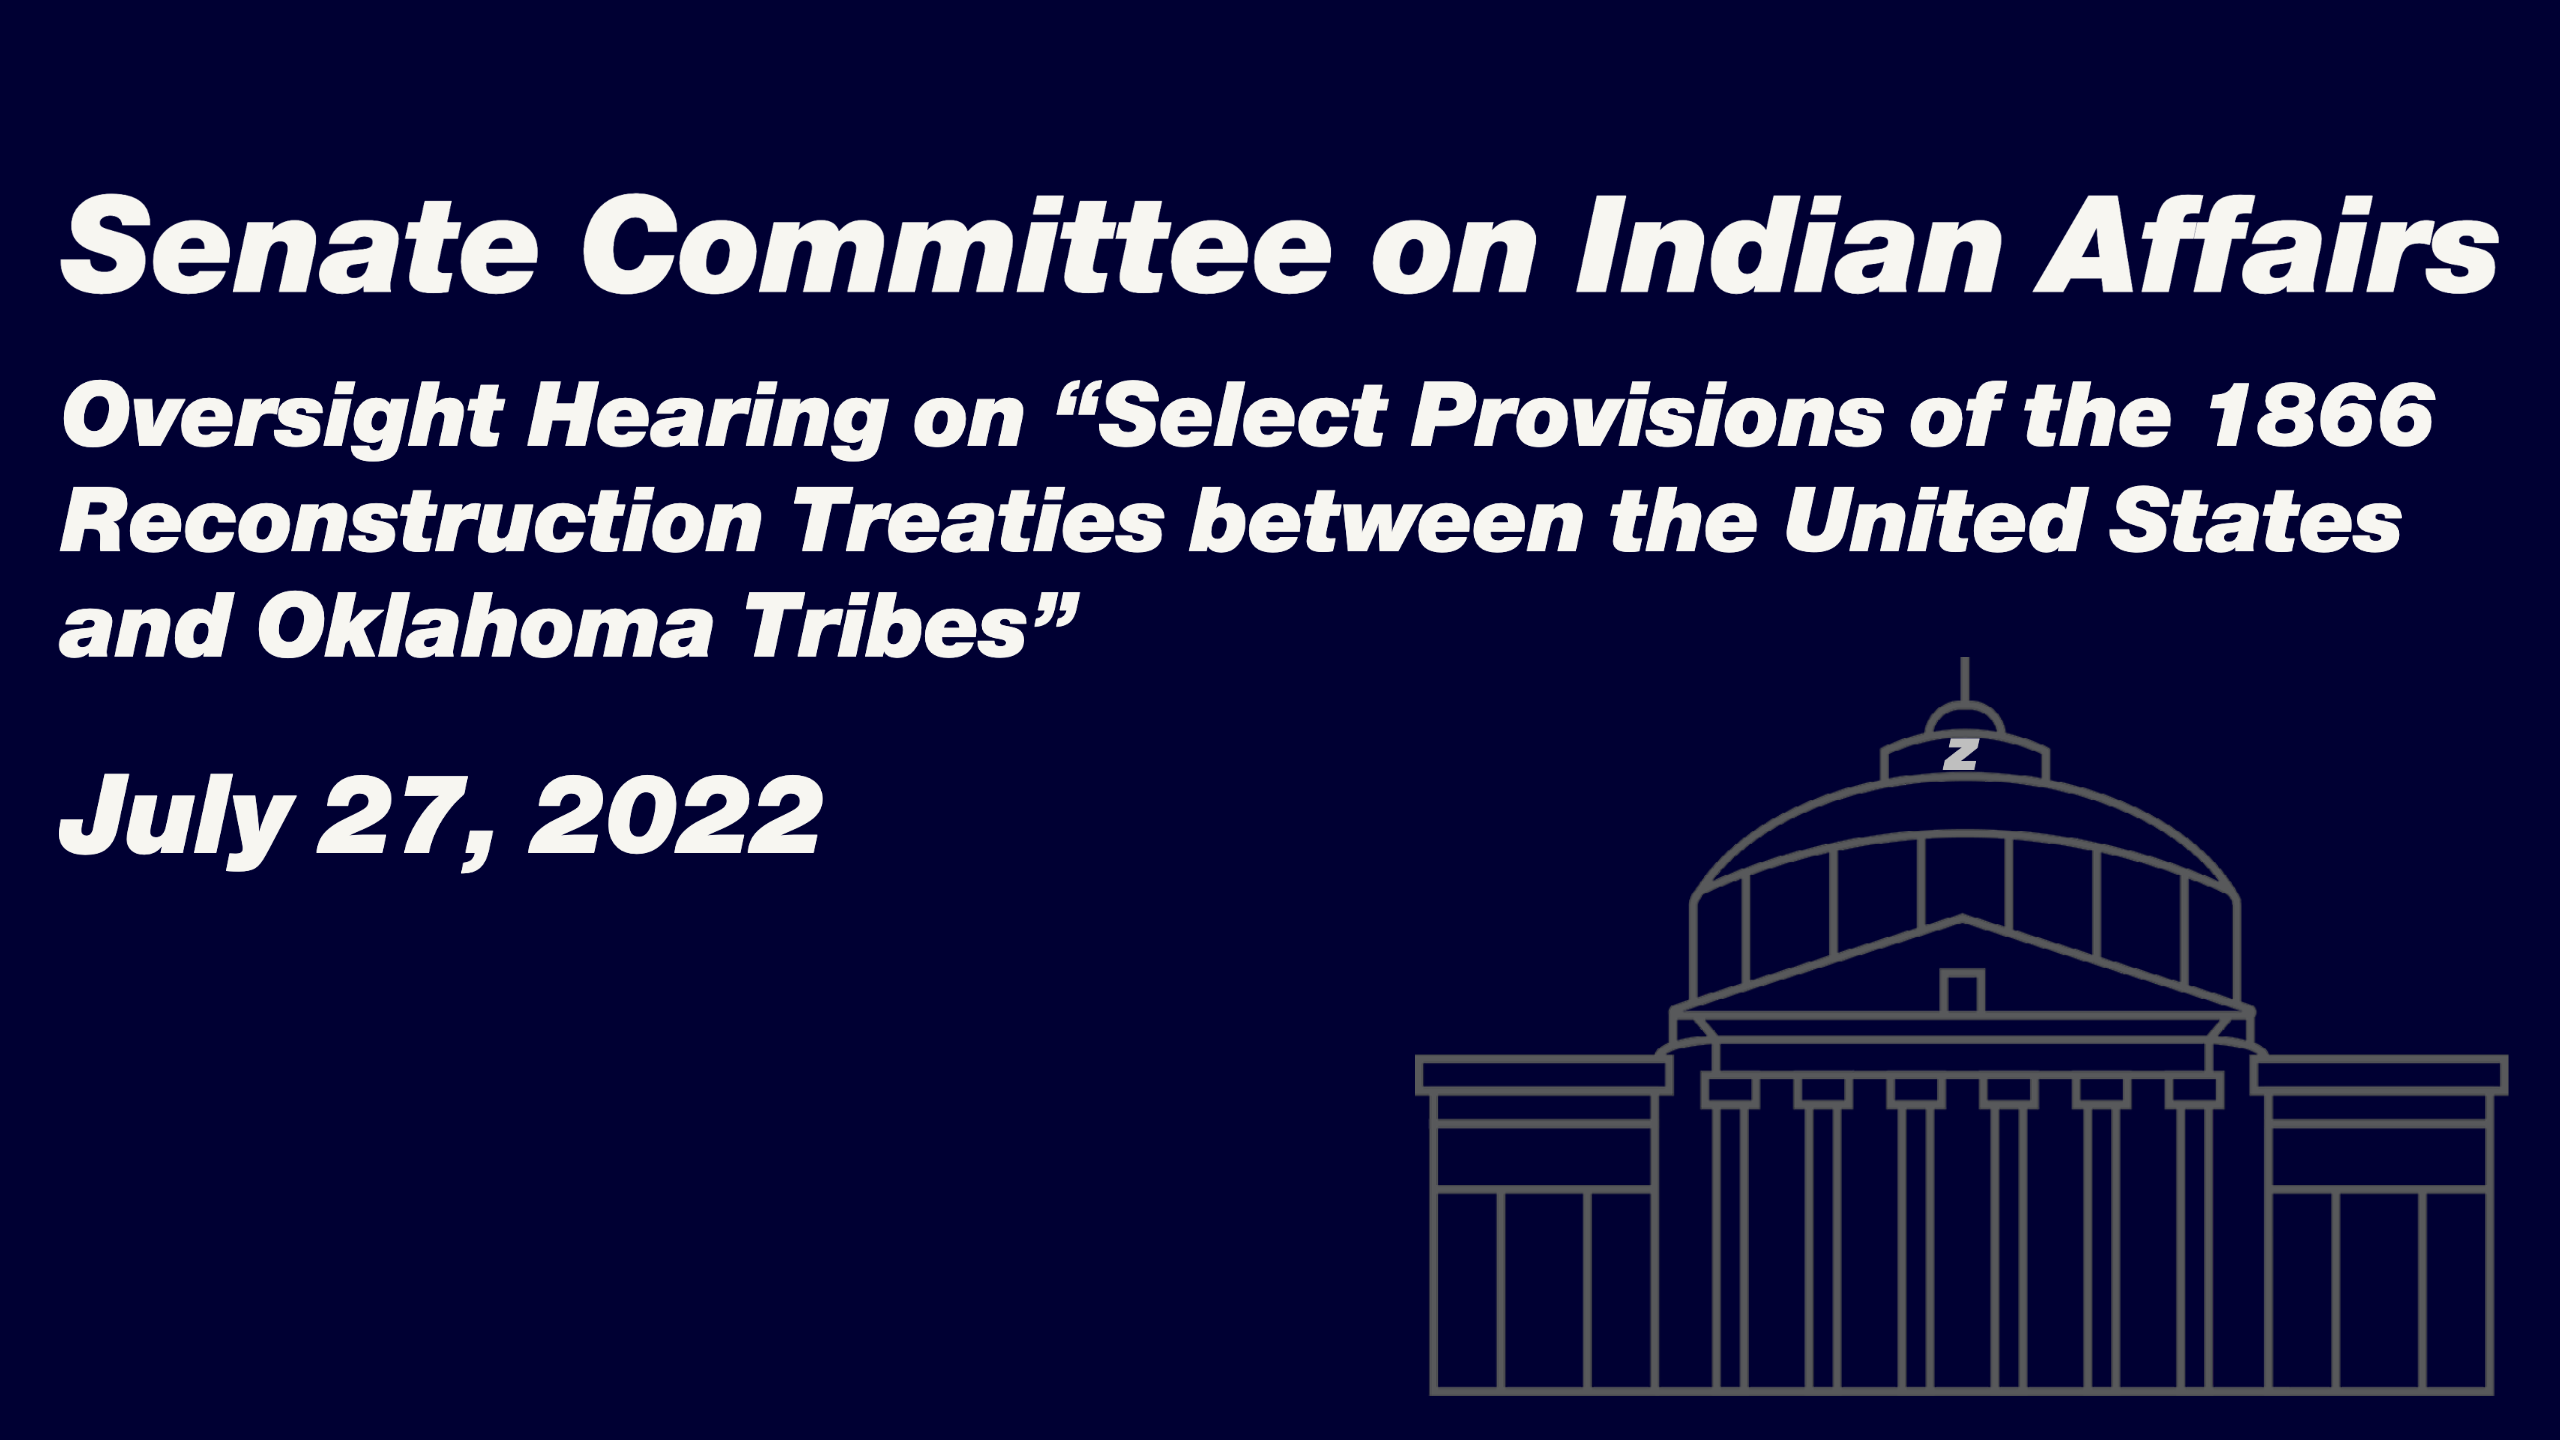 Senate Committee on Indian Affairs Oversight Hearing on "Select Provisions of the 1866 Reconstruction Treaties between the United States and Oklahoma Tribes"